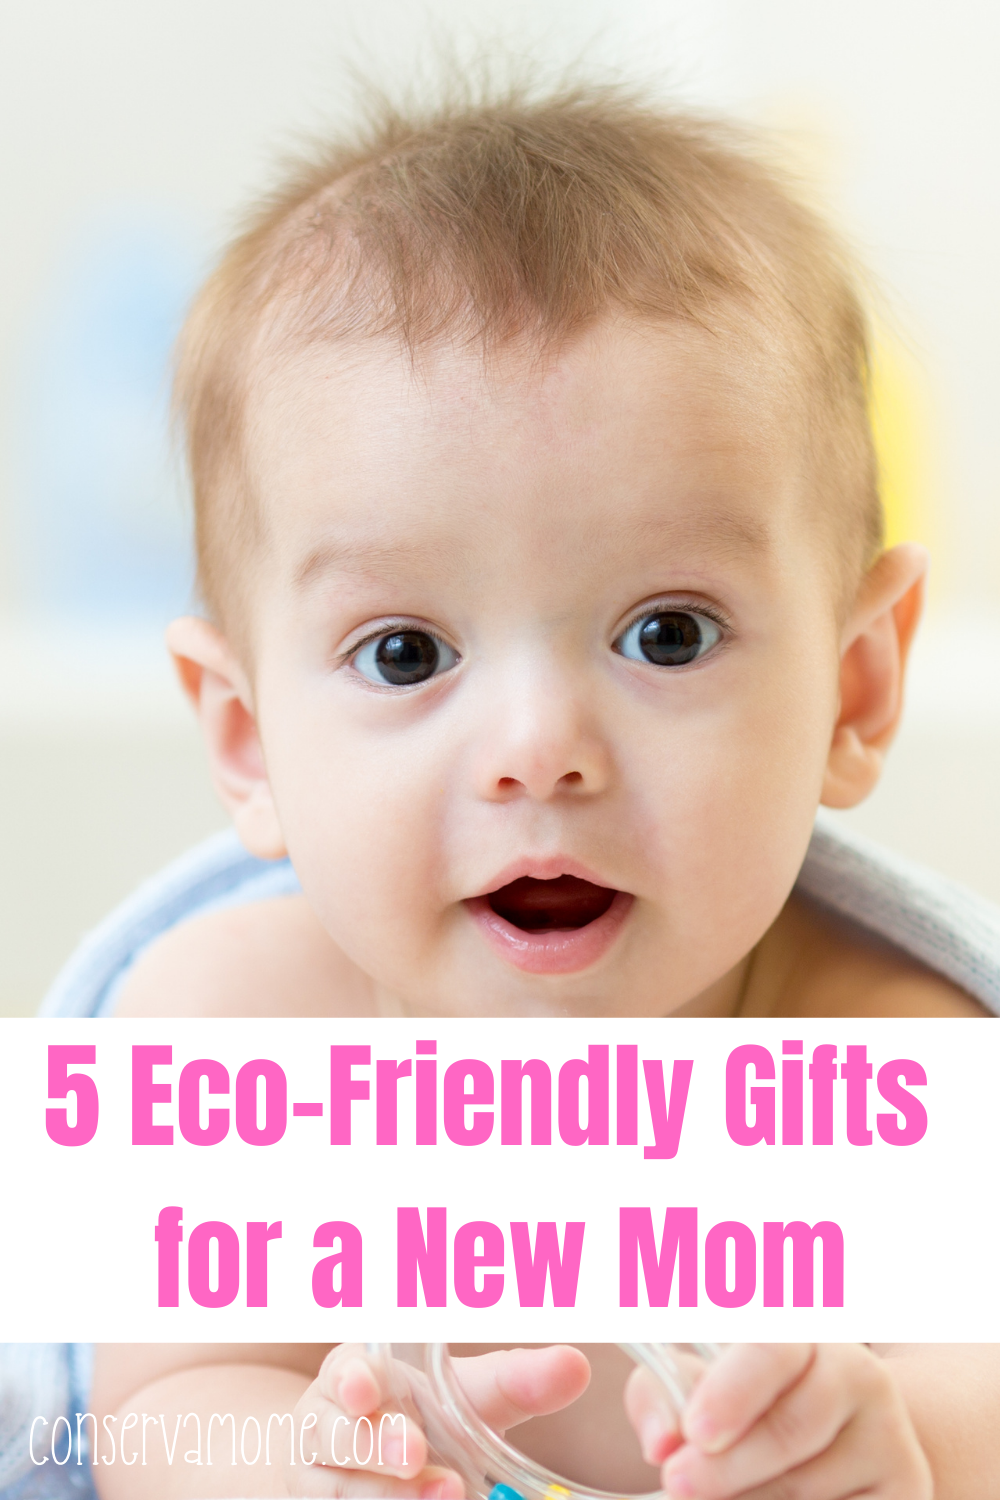 5 Eco-friendly Gifts for a new mom